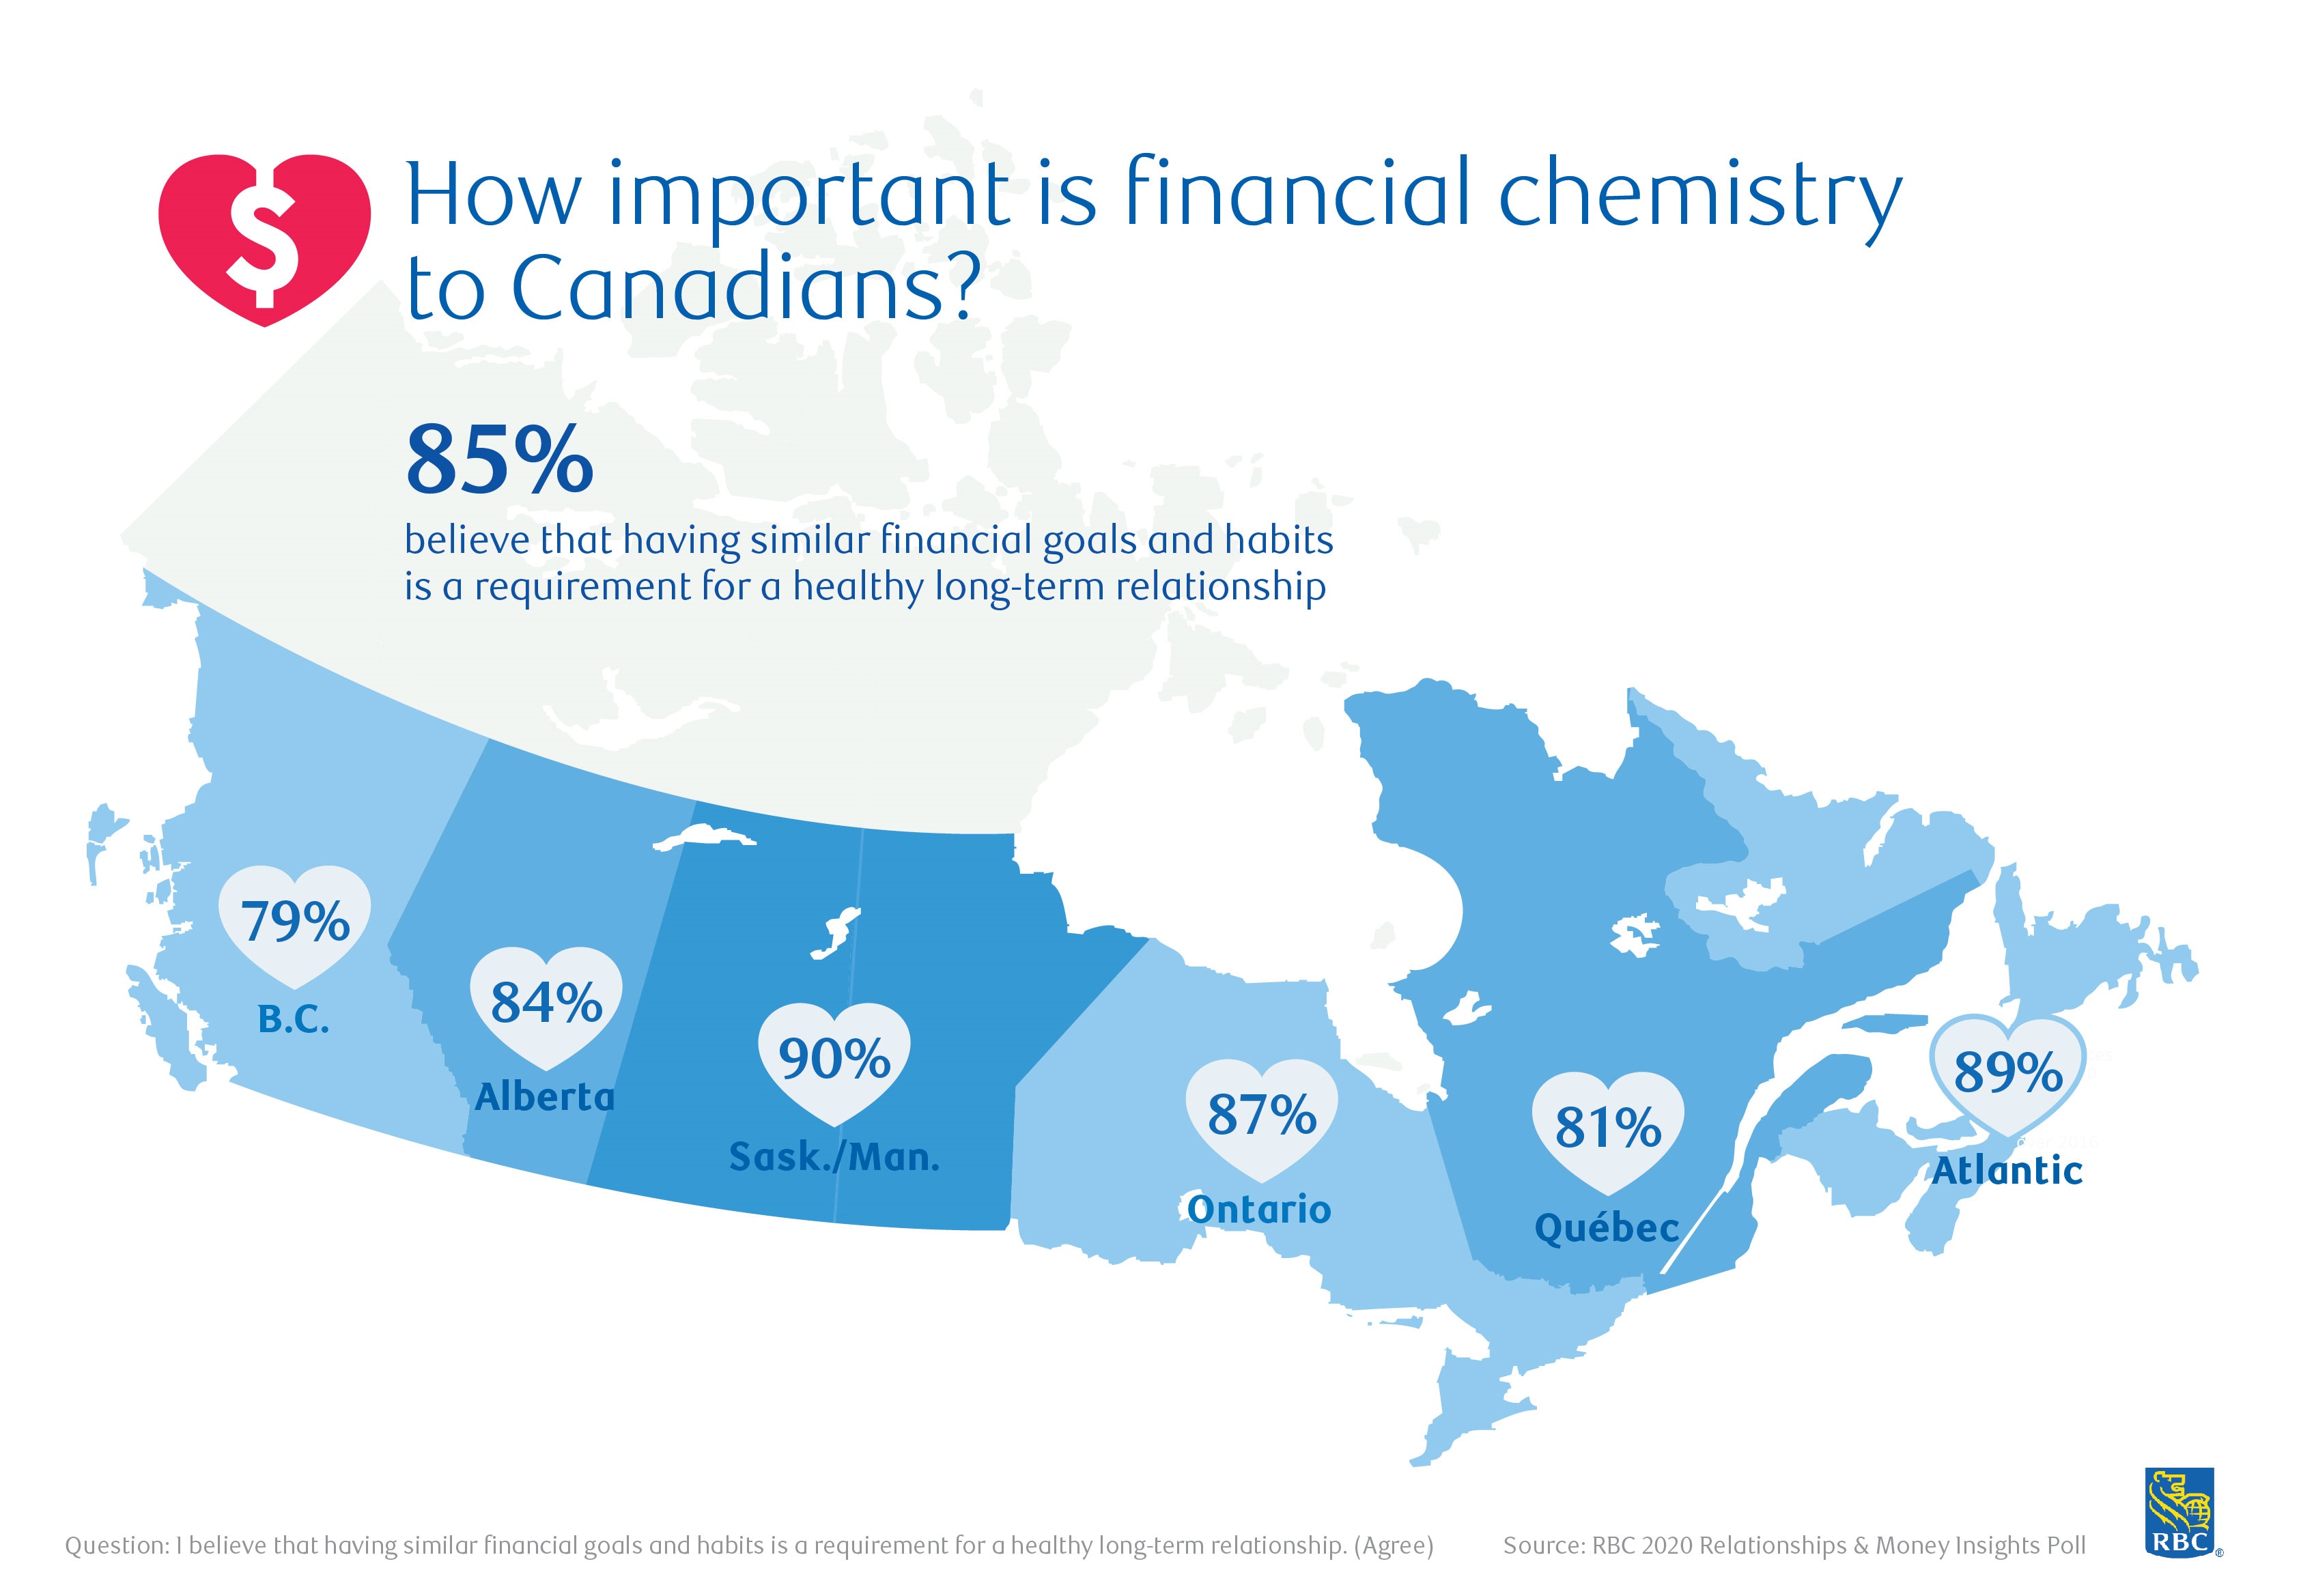 How important is financial chemistry to Canadians?